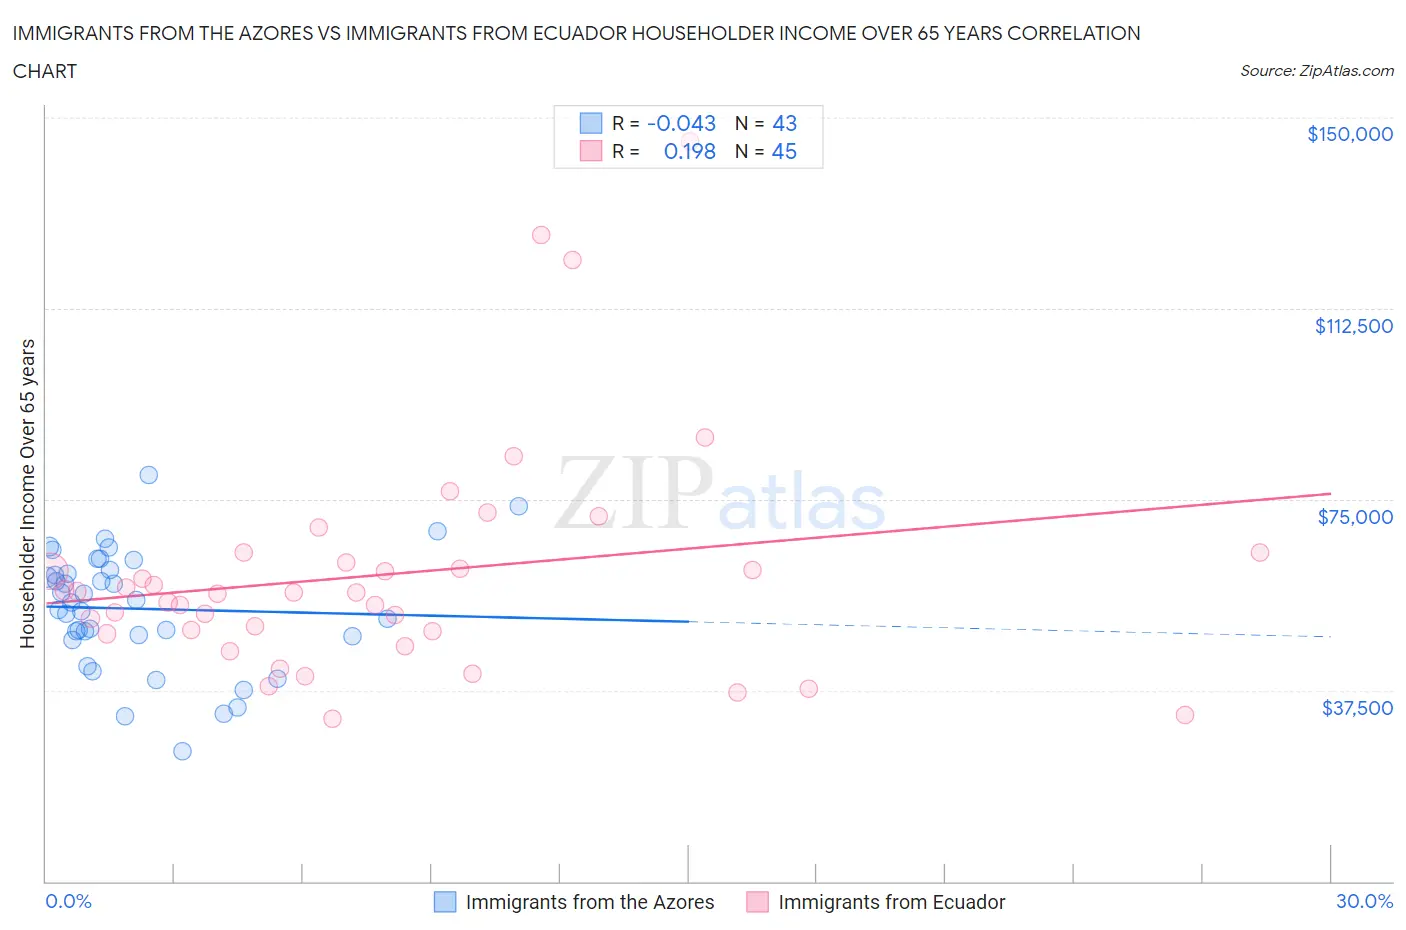 Immigrants from the Azores vs Immigrants from Ecuador Householder Income Over 65 years